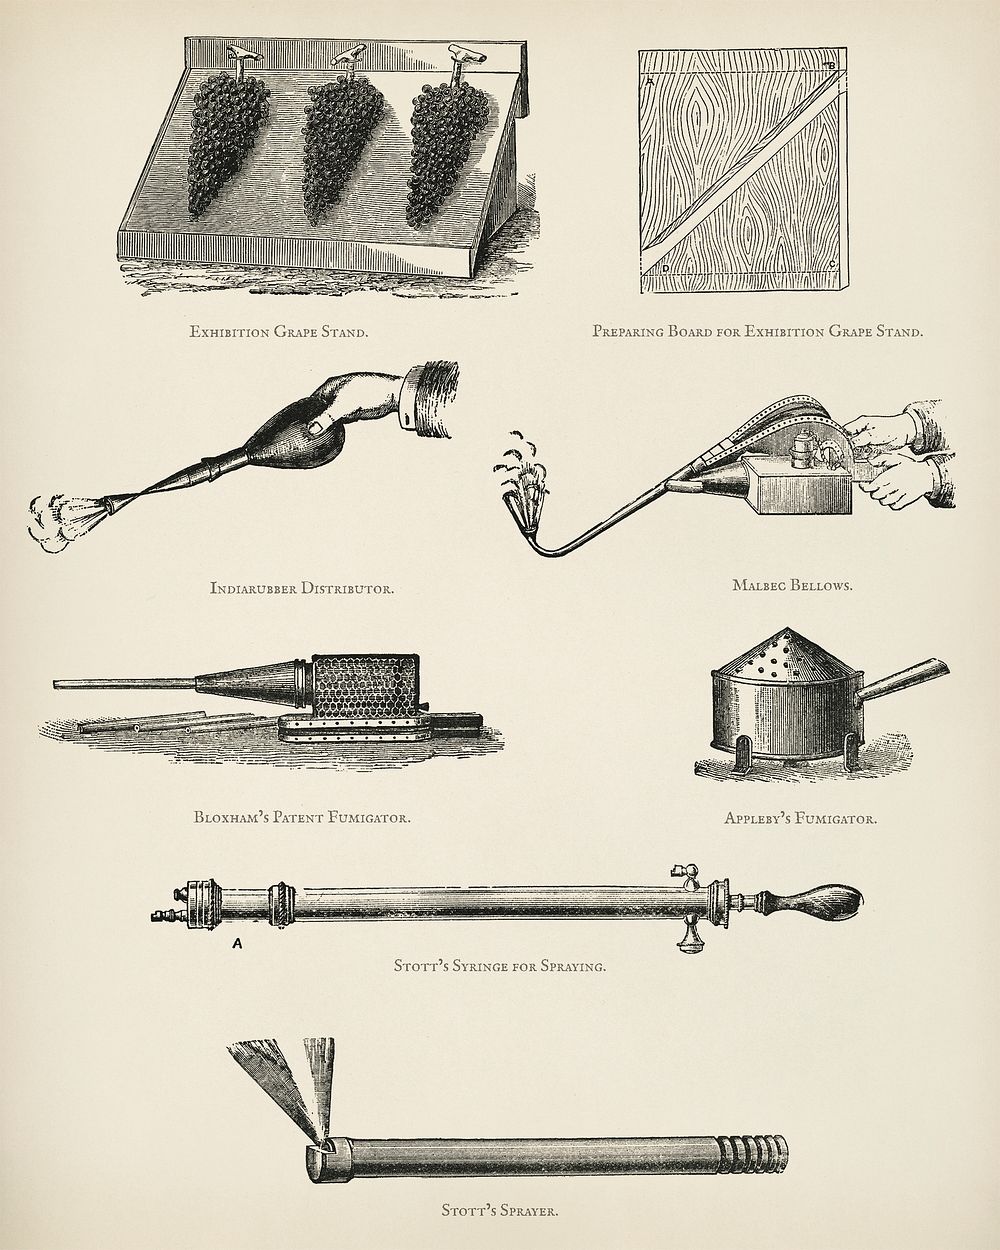 The fruit grower's guide : Vintage illustration of tools